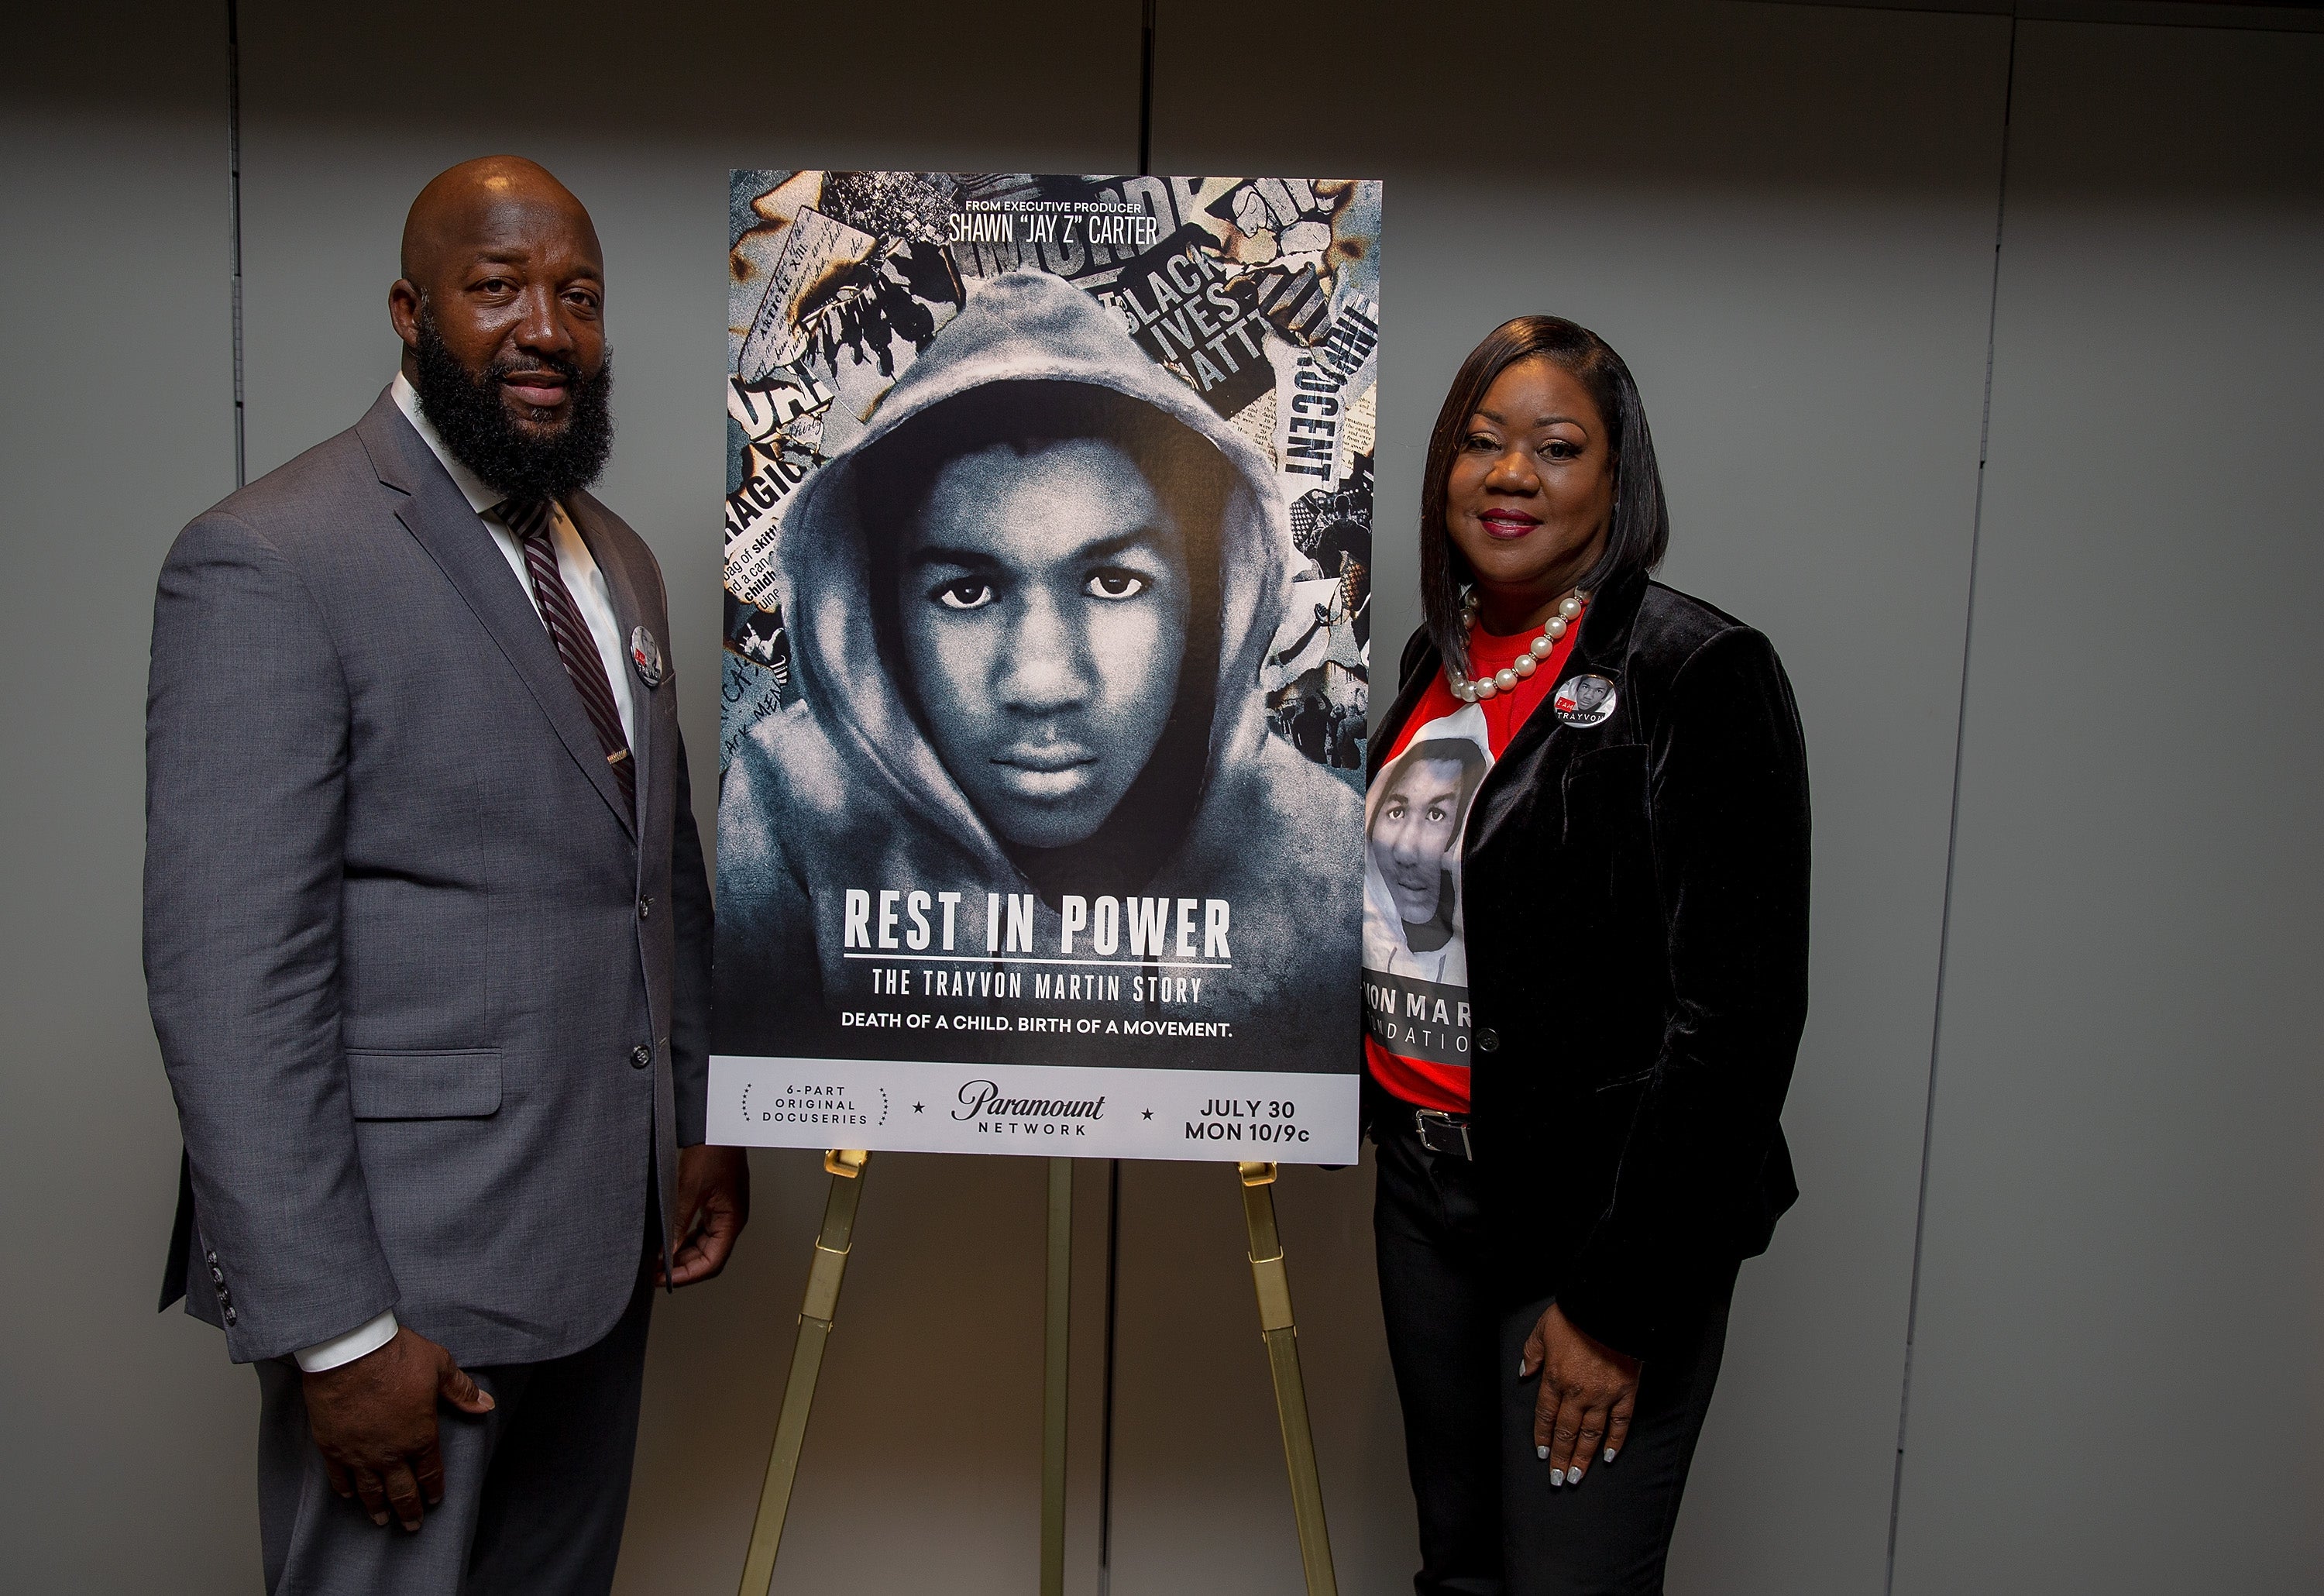 Trayvon Martin's Parents Discuss Their Healing Process And Reliving The Day They Lost Him For Powerful New Docuseries
